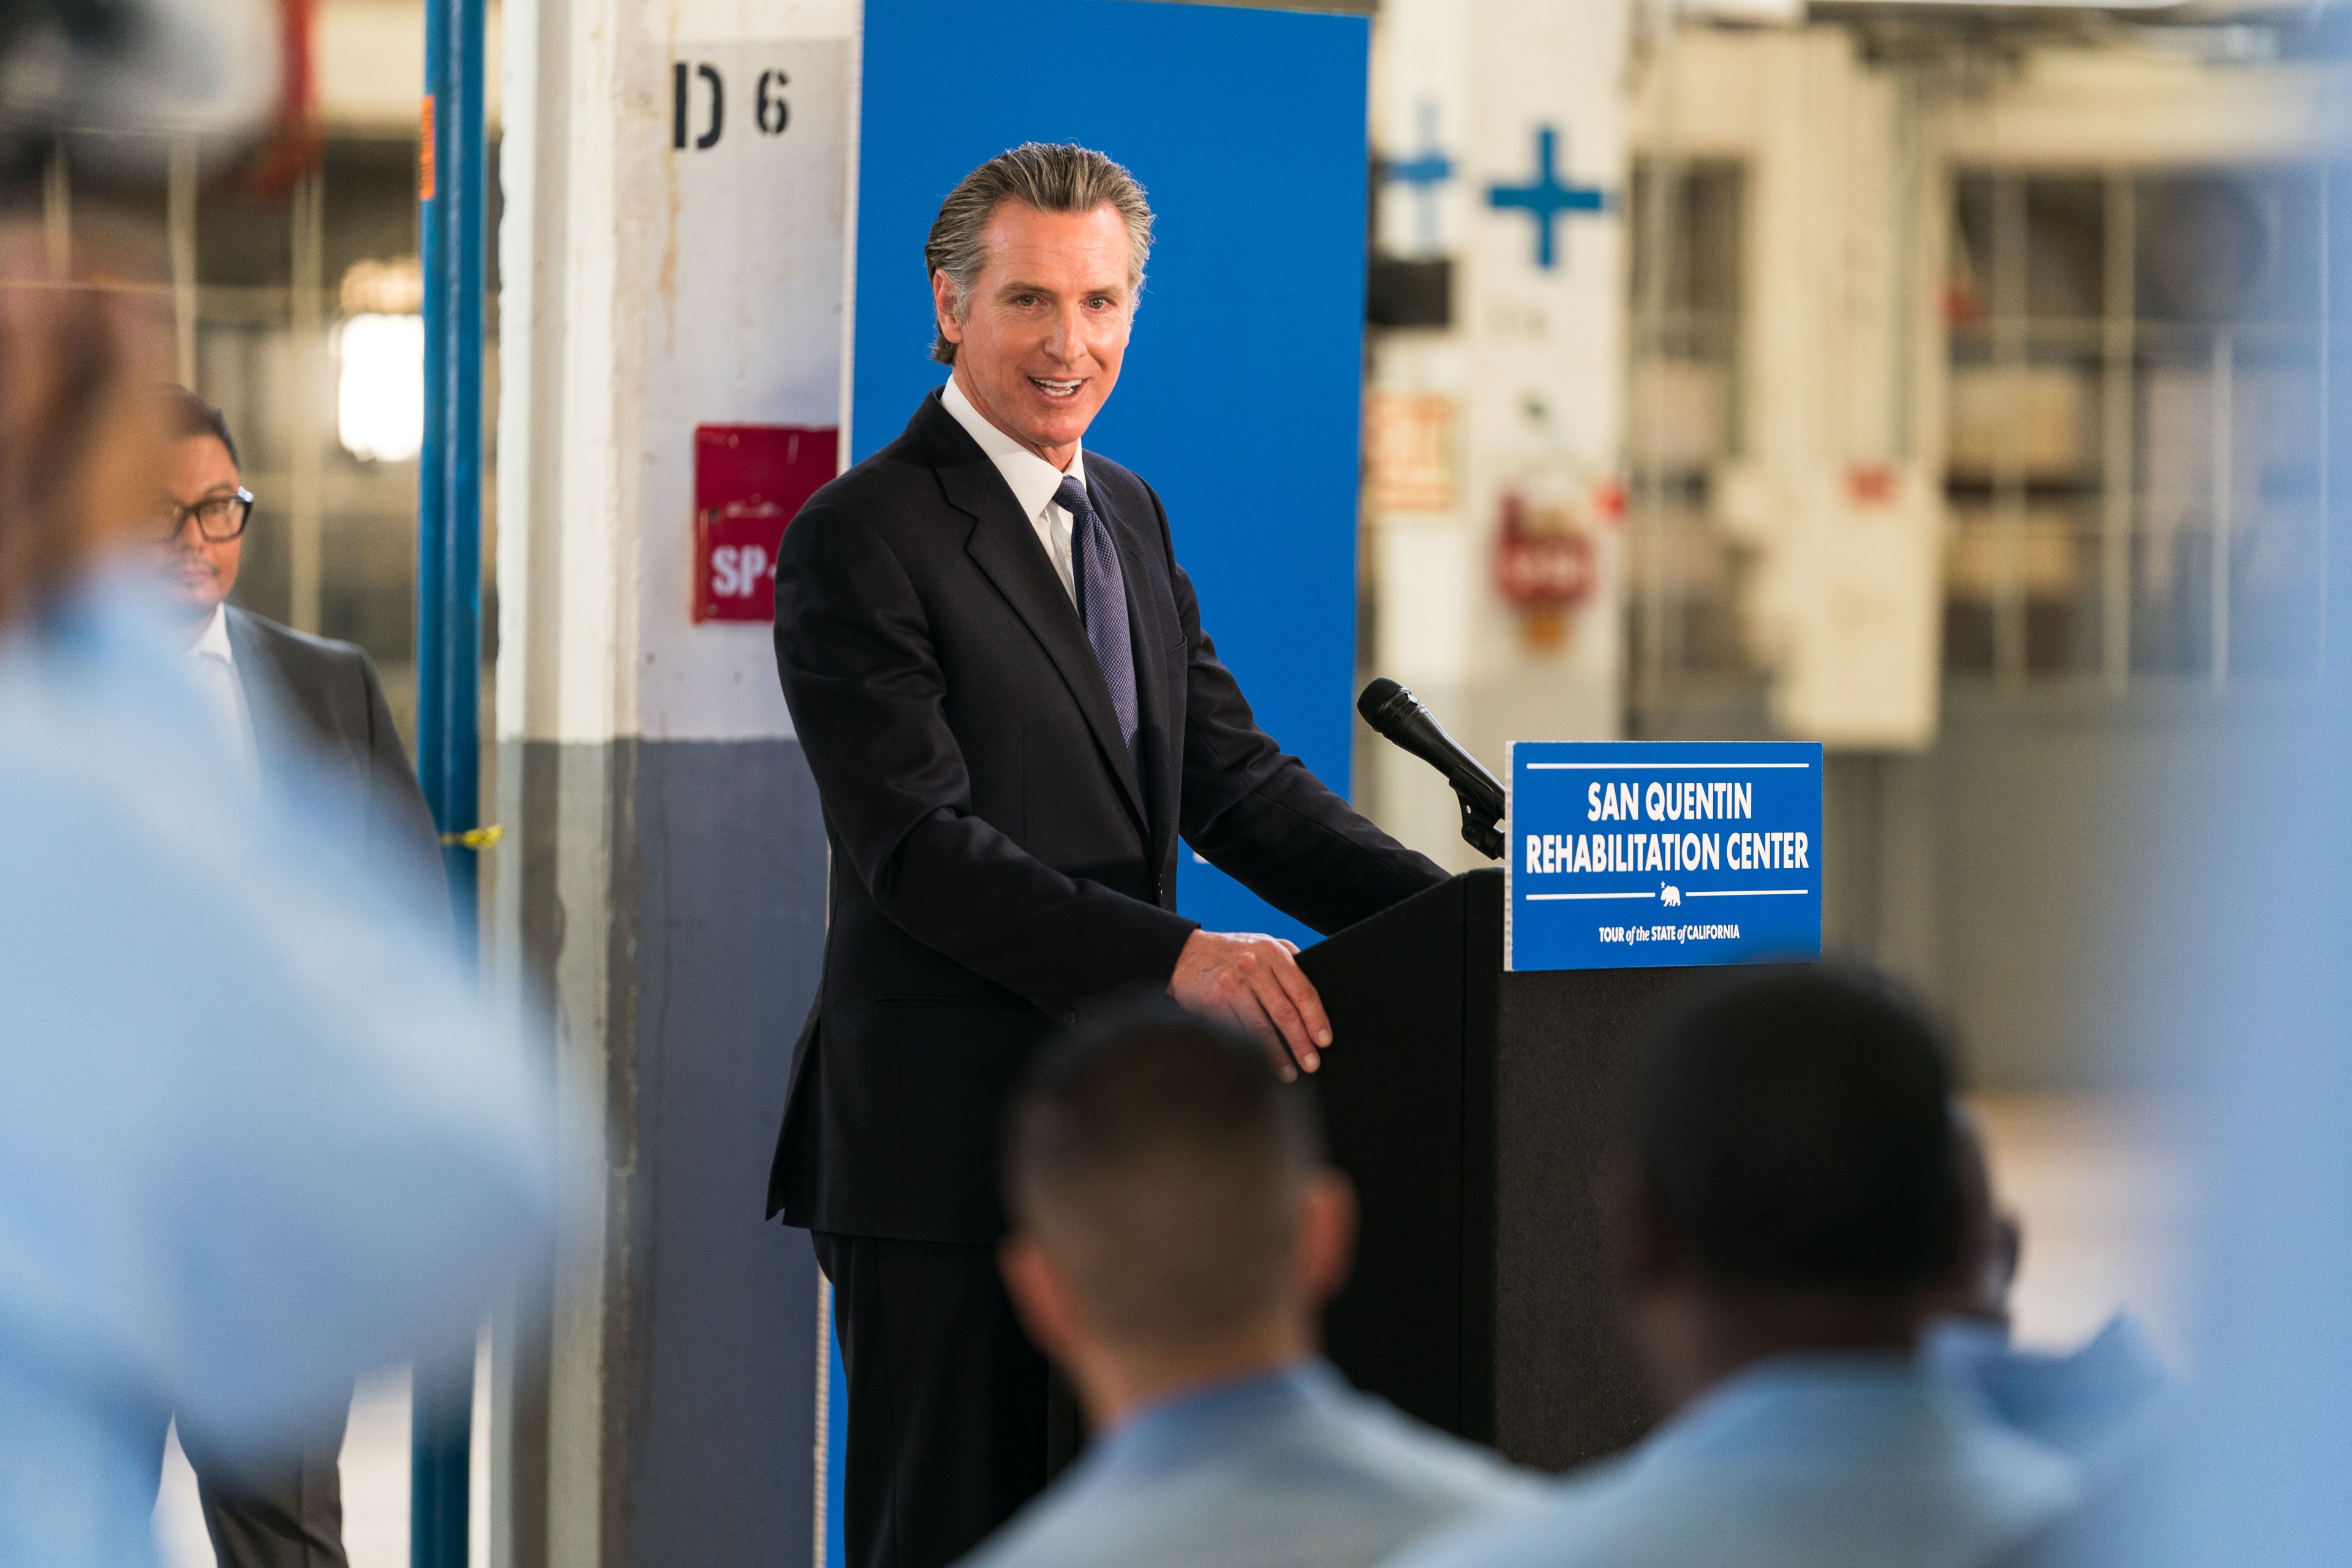 A man in a suit stands at a podium marked &quot;San Quentin Rehabilitation Center&quot; with blurred listeners in the foreground.